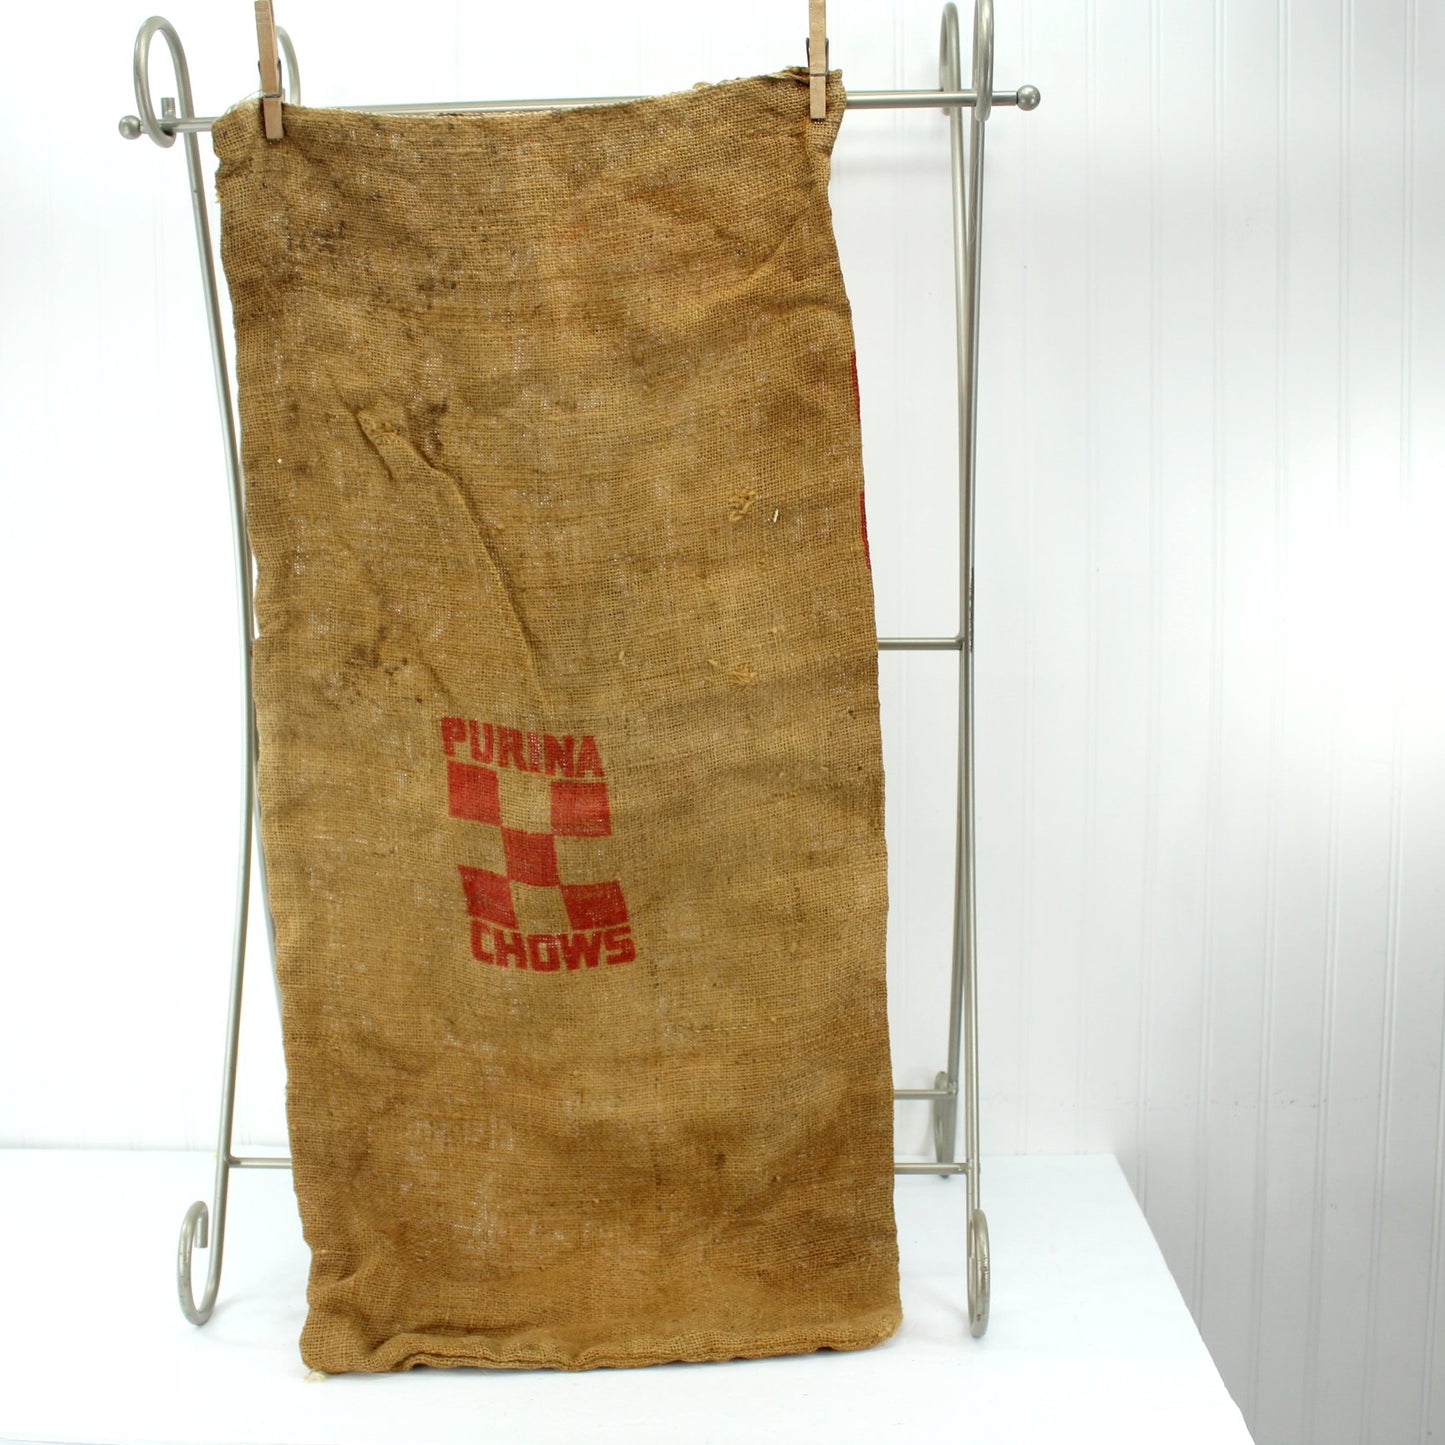 Purina Vintage Poultry Chows Burlap Feed Bag 50# Size reverse view